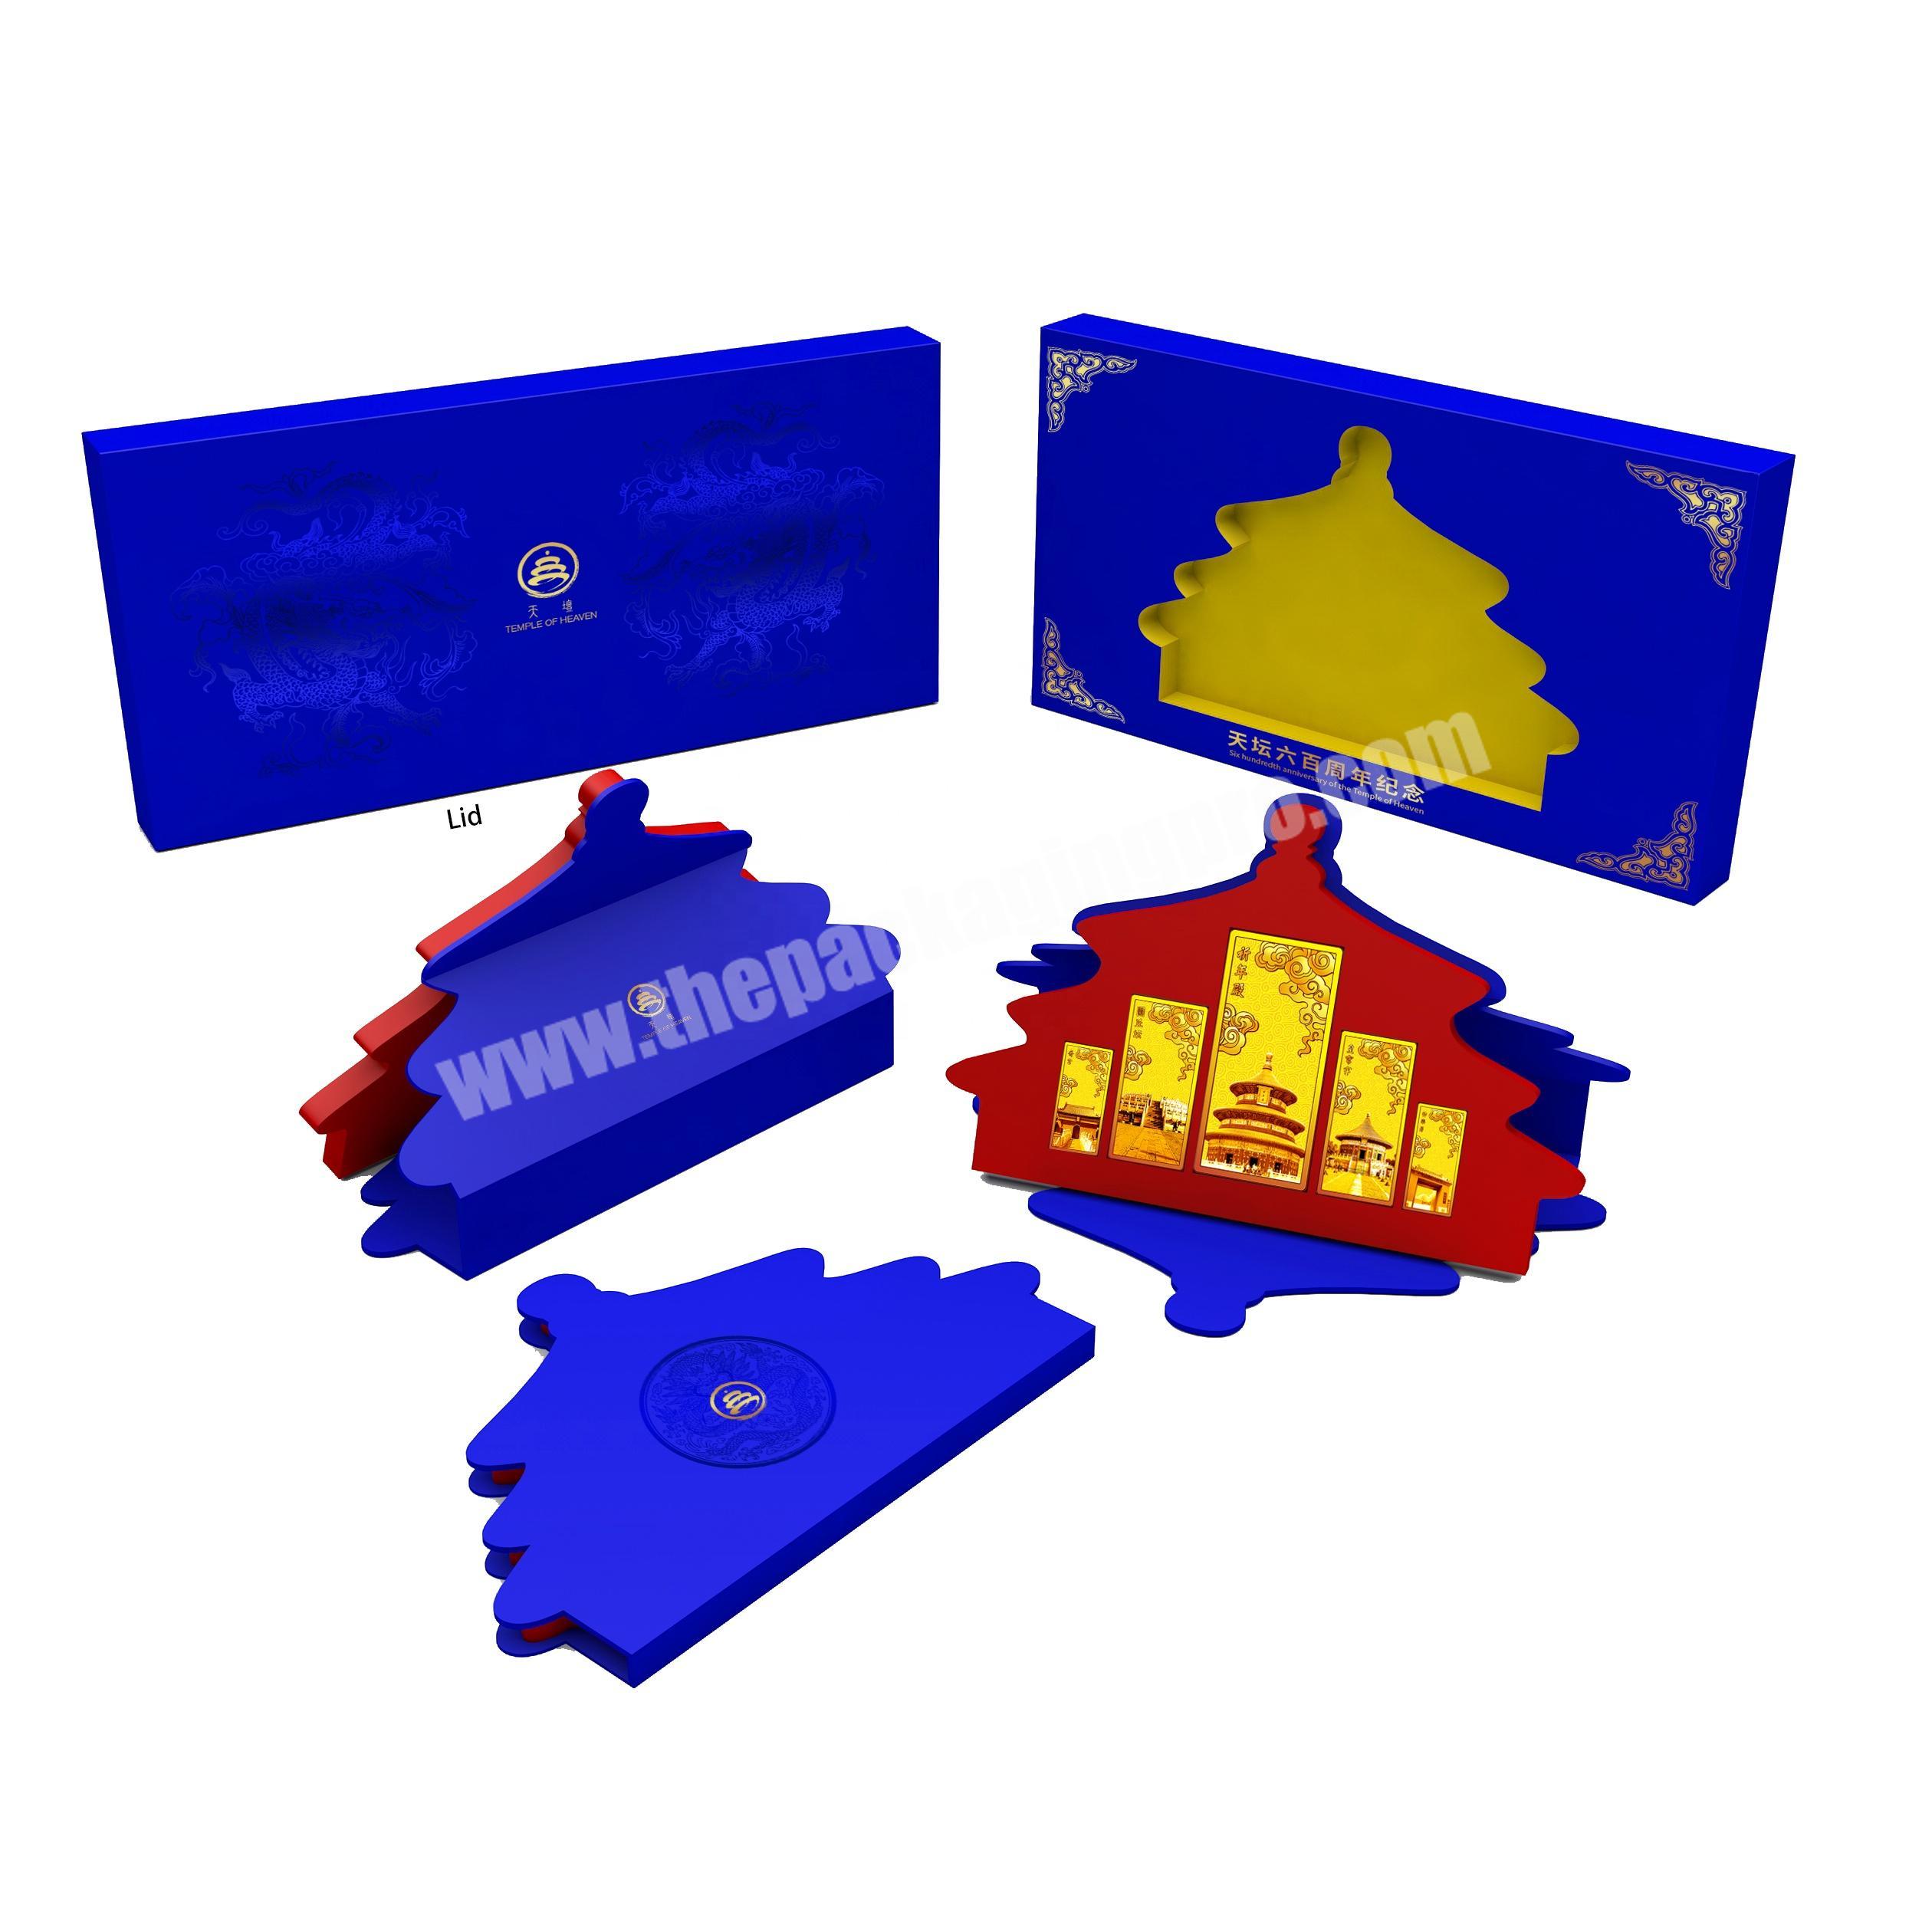 spot UV offset printing paperboard blue lid and base photo album medal packaging box with acrylic stand and foam pad